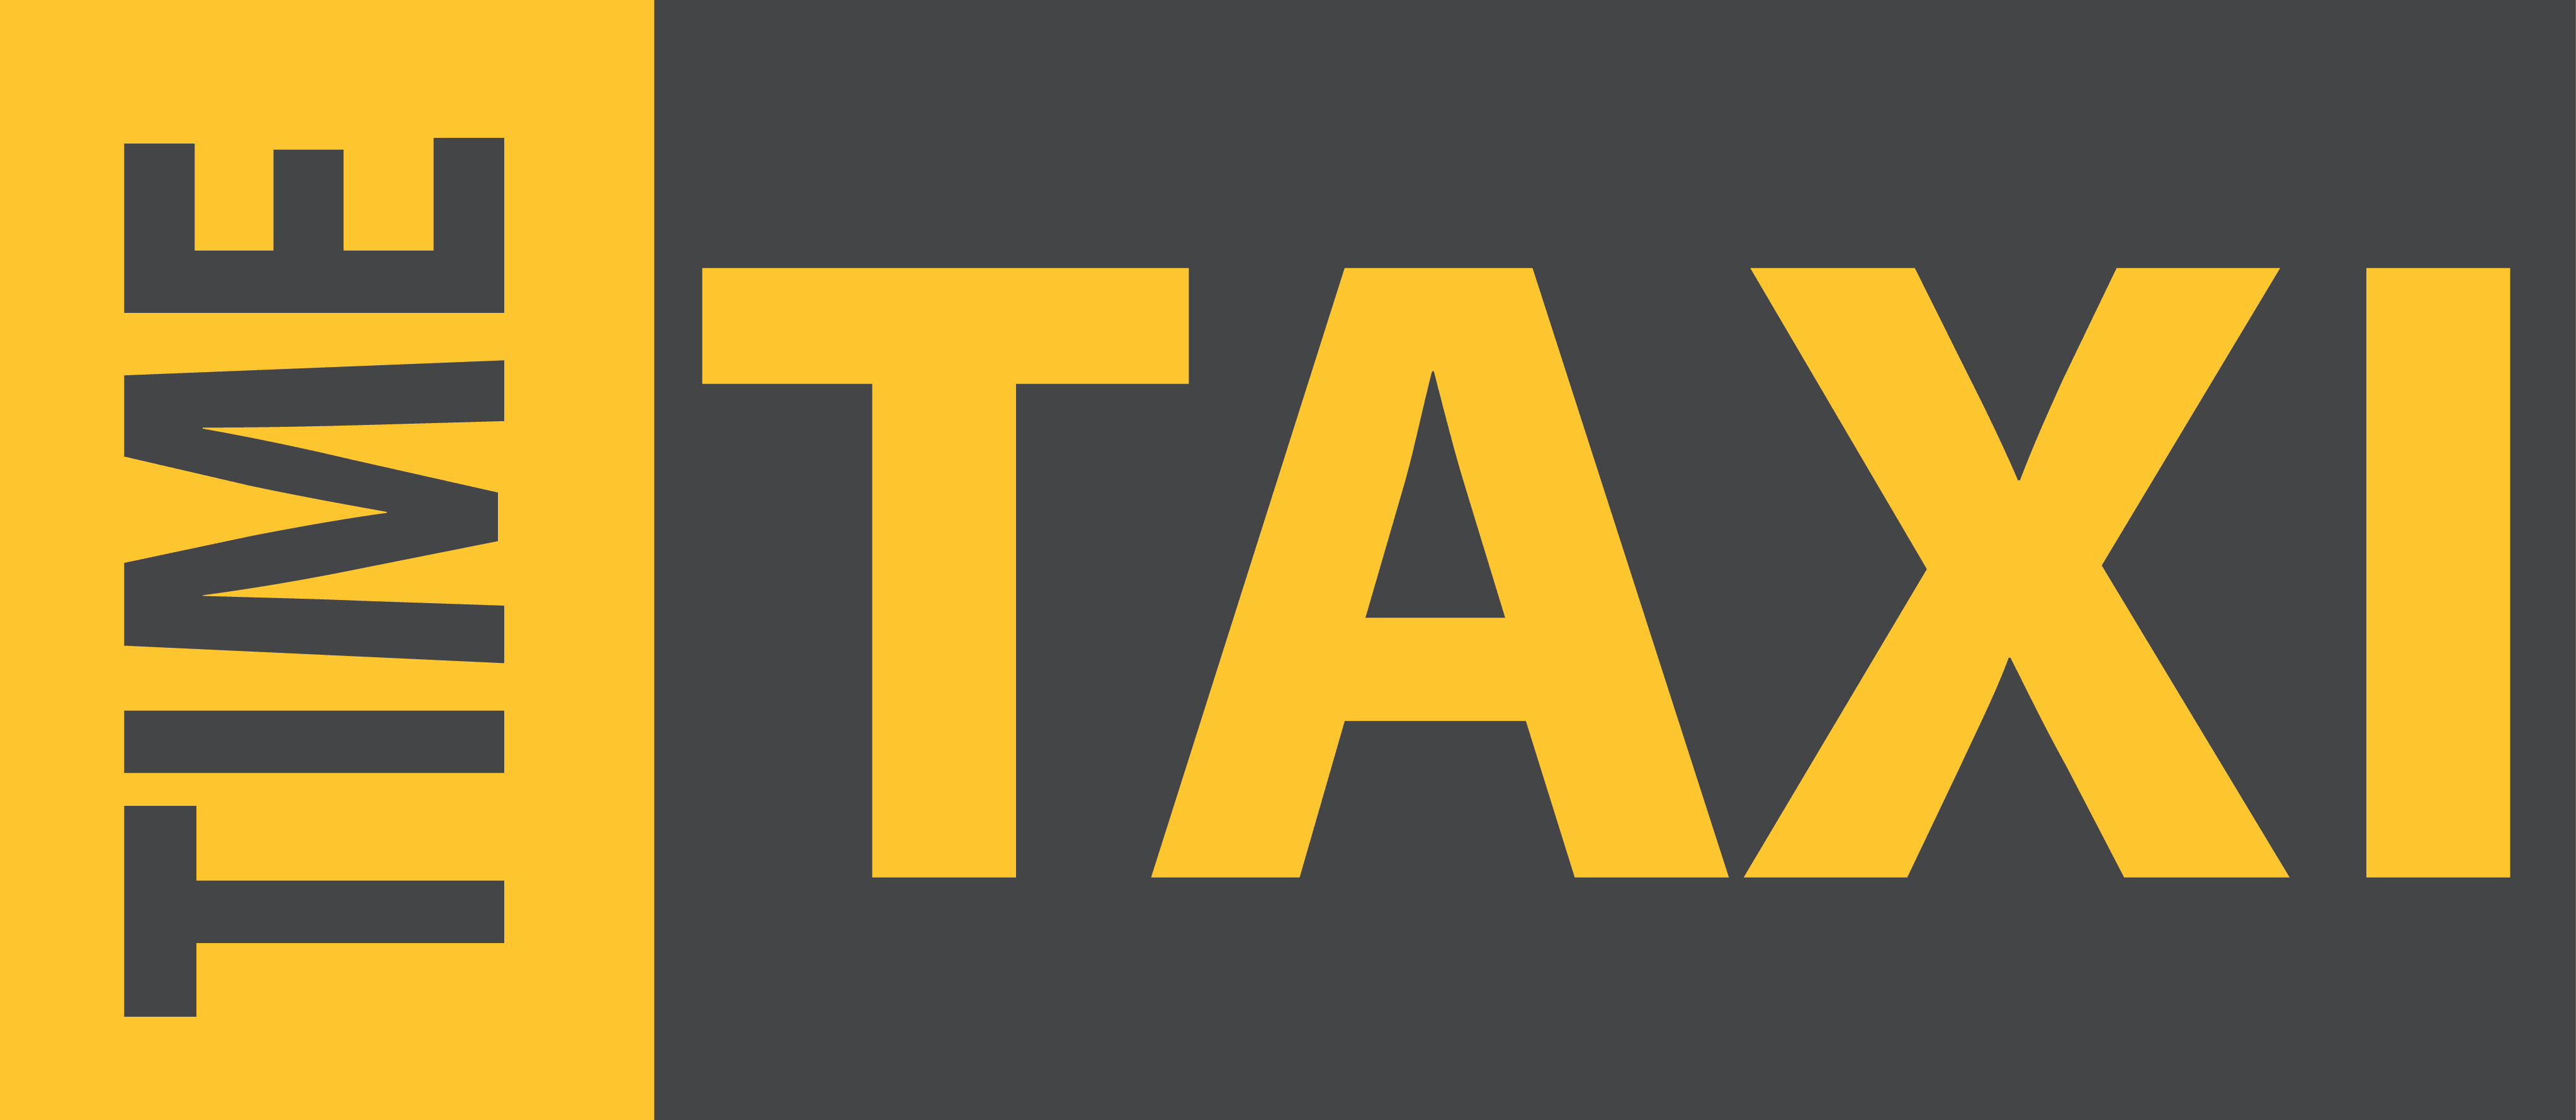 Tampa Taxi Service